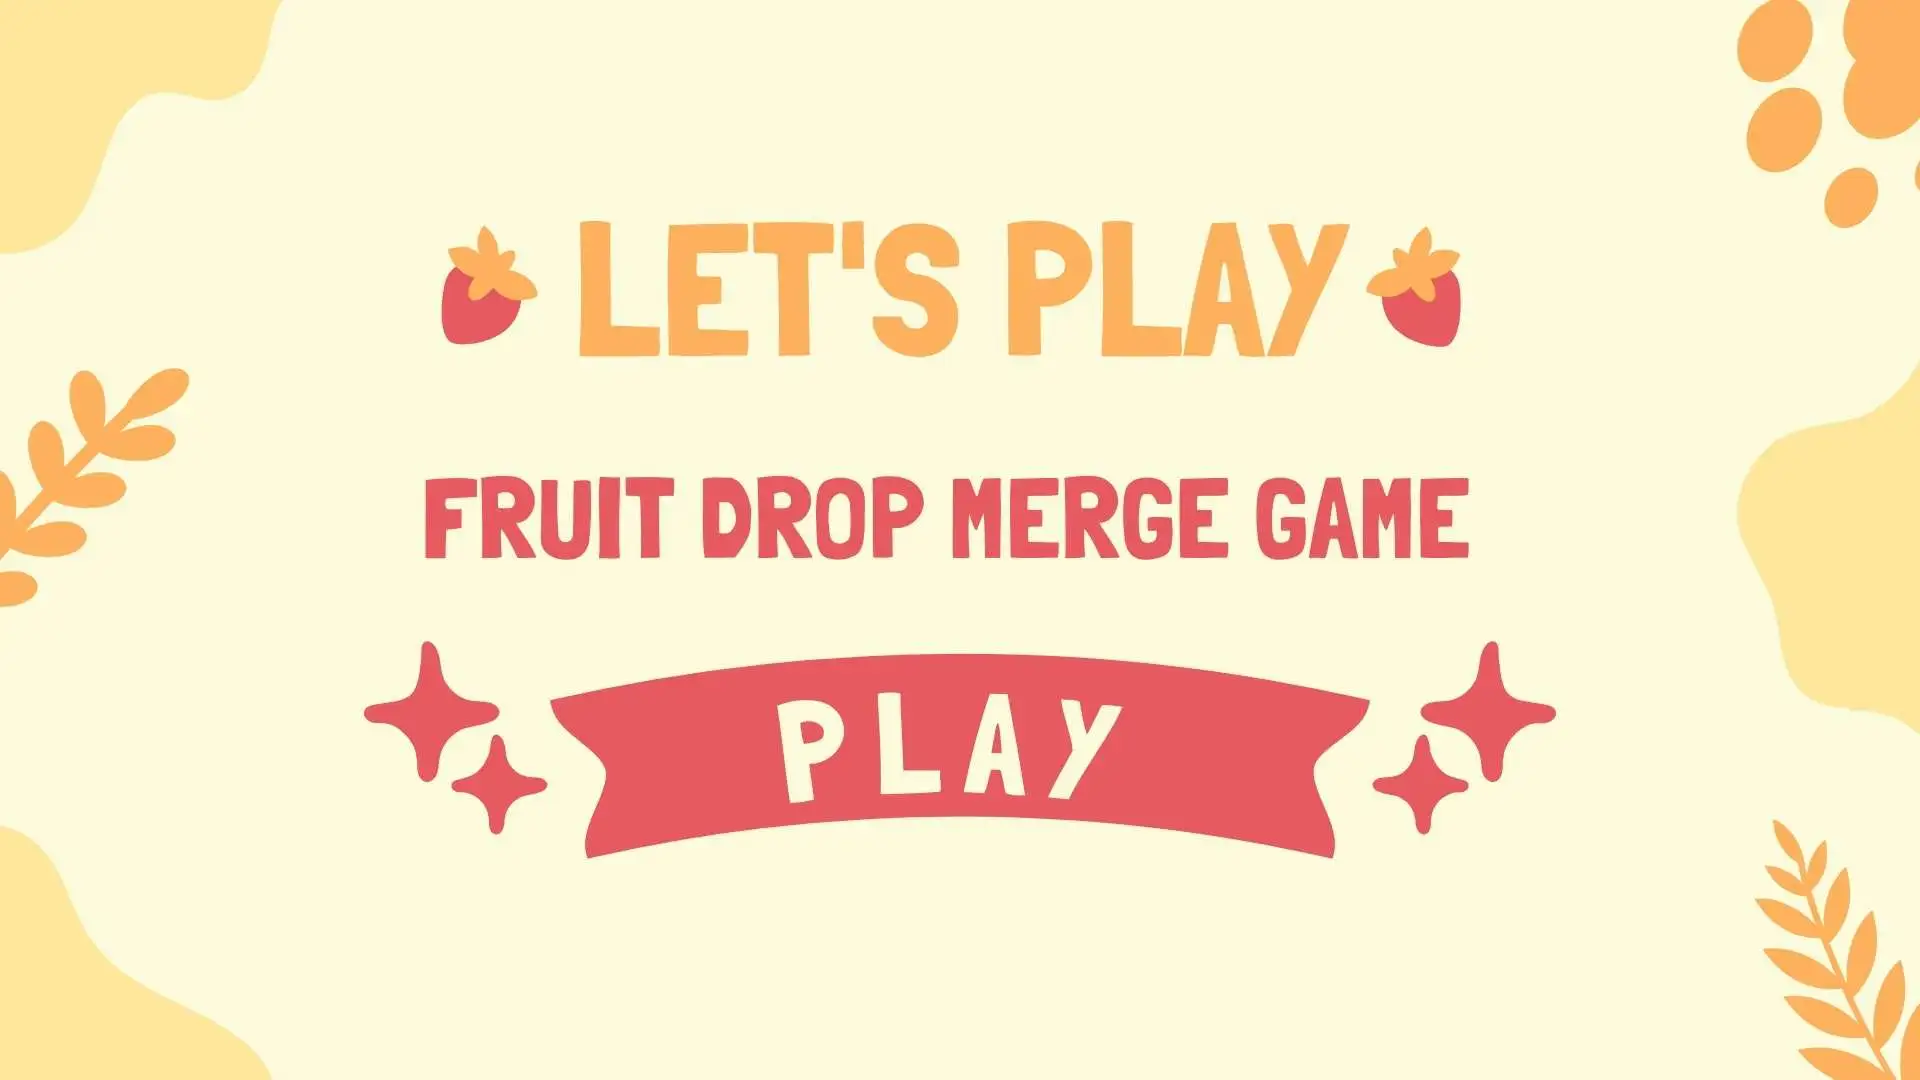 Fruit Drop Merge Game Strategies for High Scores